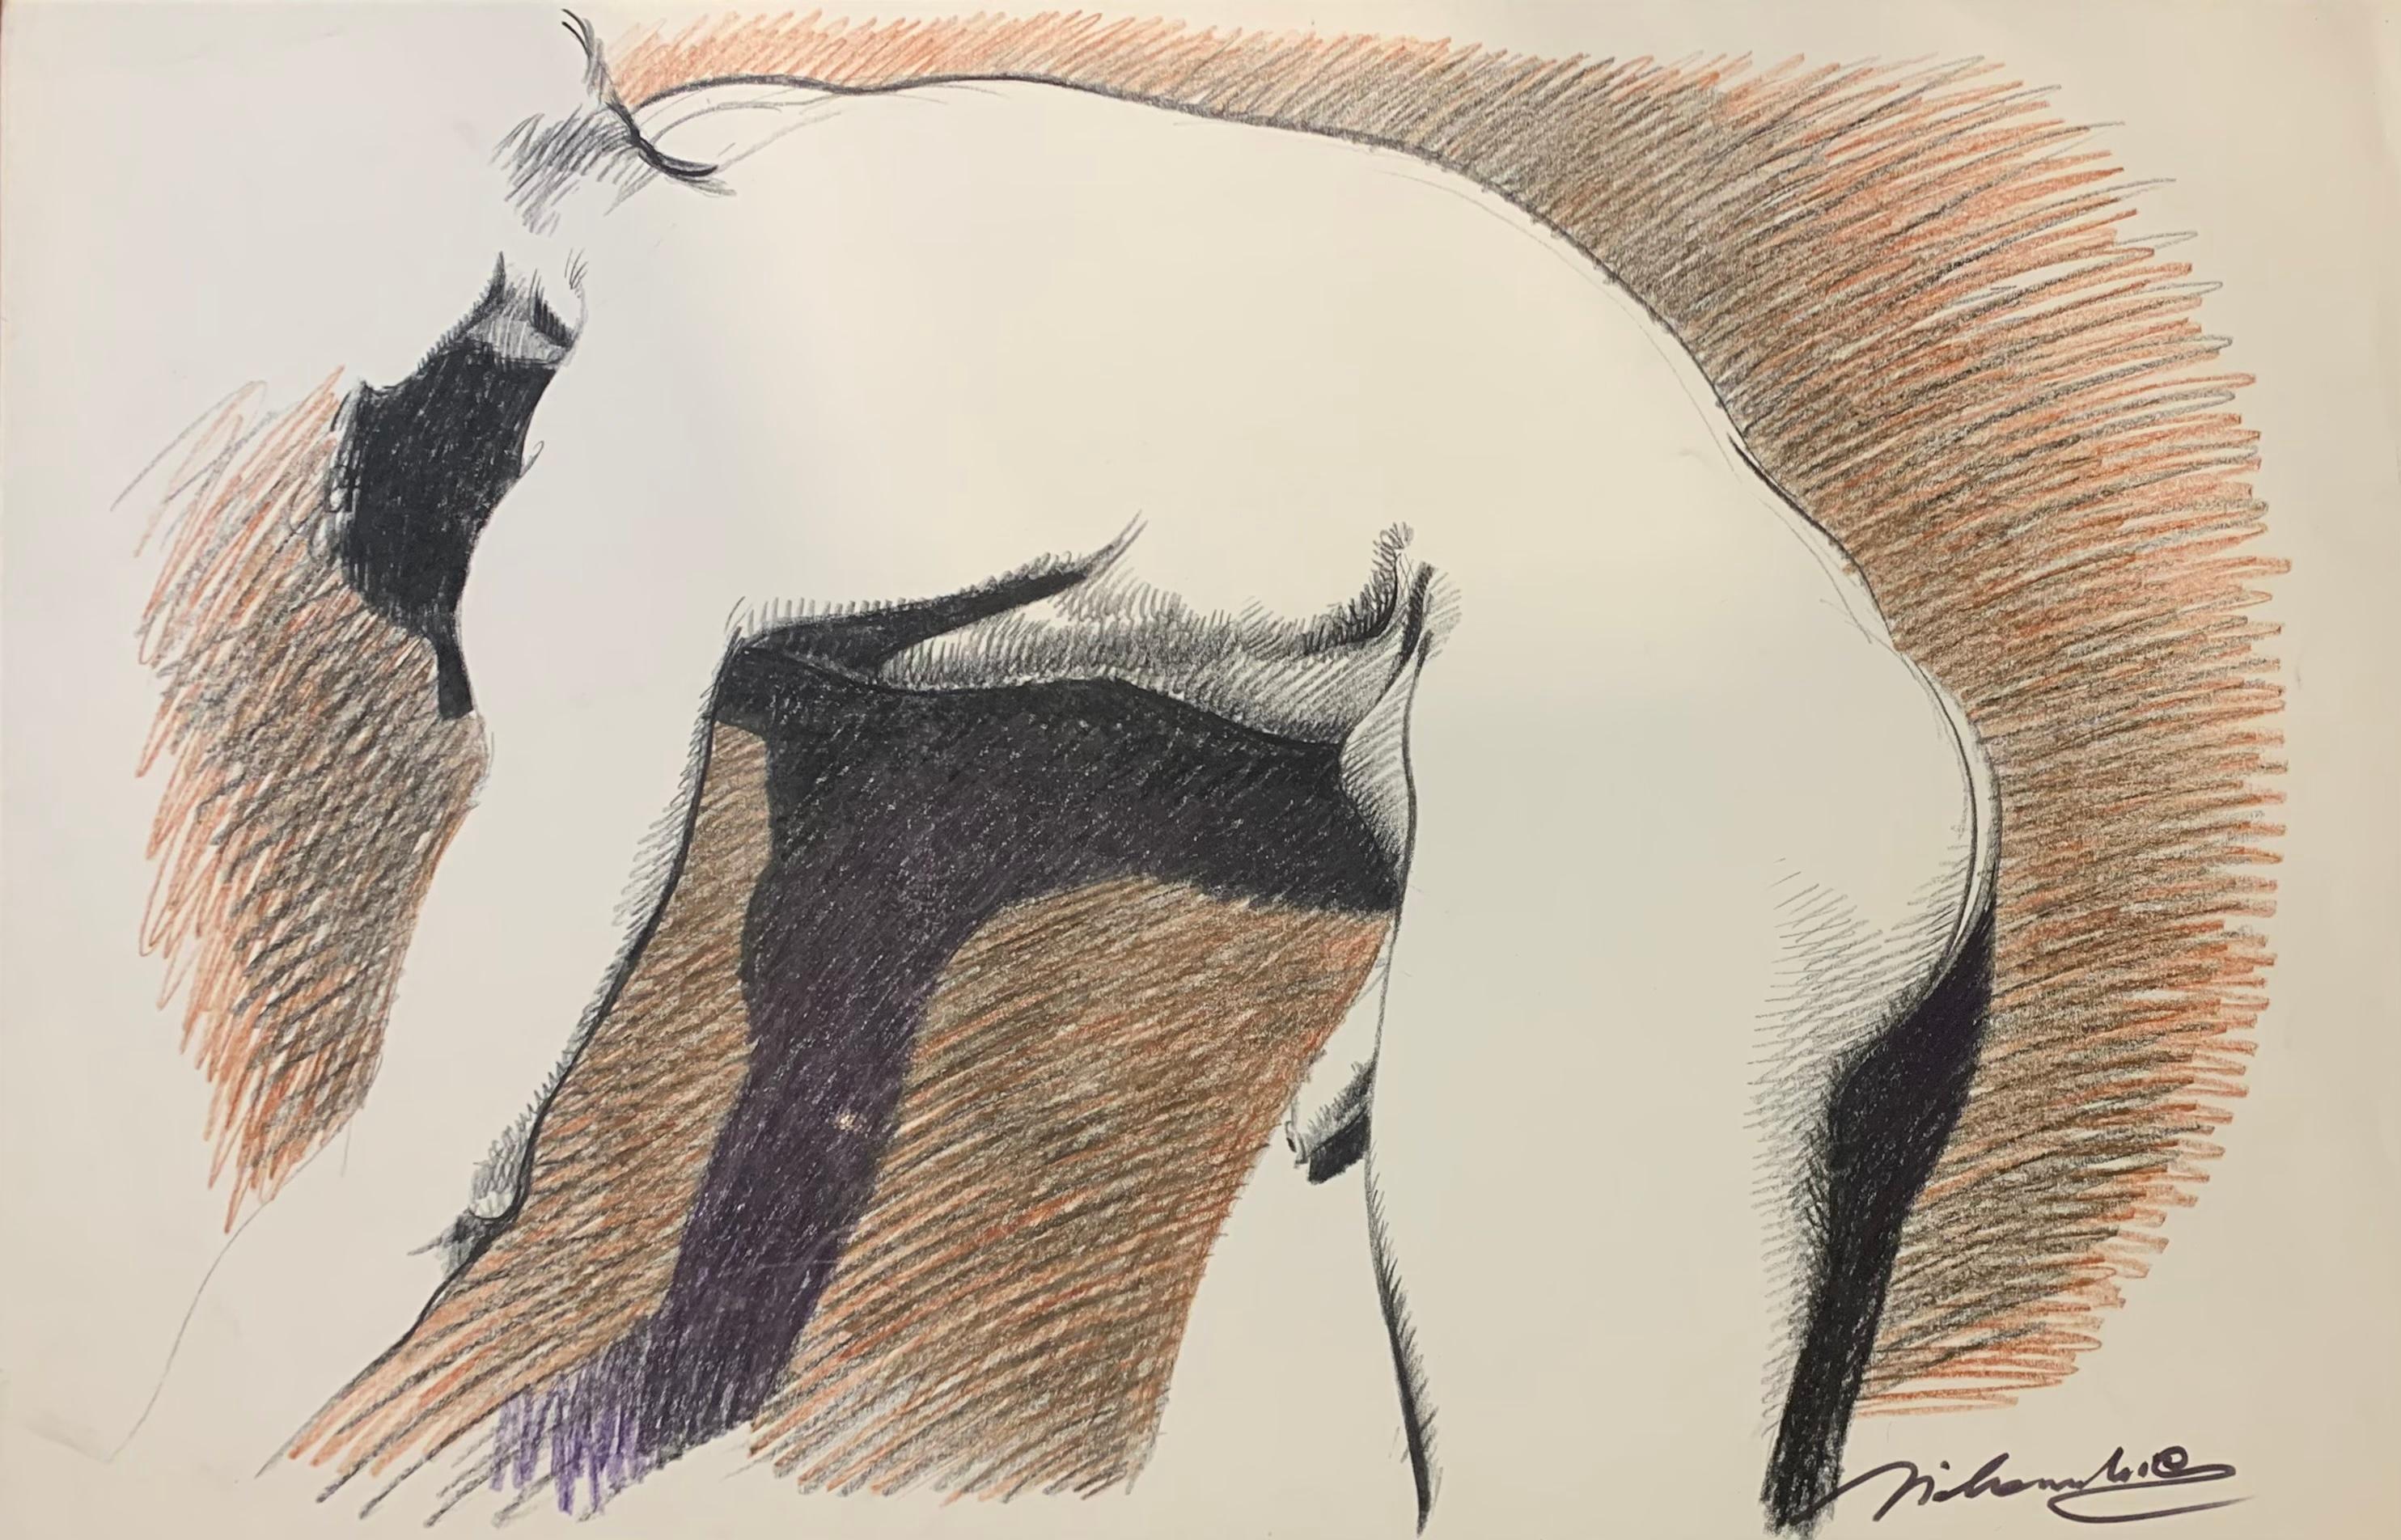 The body of a slim young man. 1970s. Marco Silombria signed.
Marco Silombria, Italian advertising graphic designer, artist and ceramist.
charcoal and wax on paper.
Signed bottom right: Silombria.
On the back of the drawing there is a sketch of a